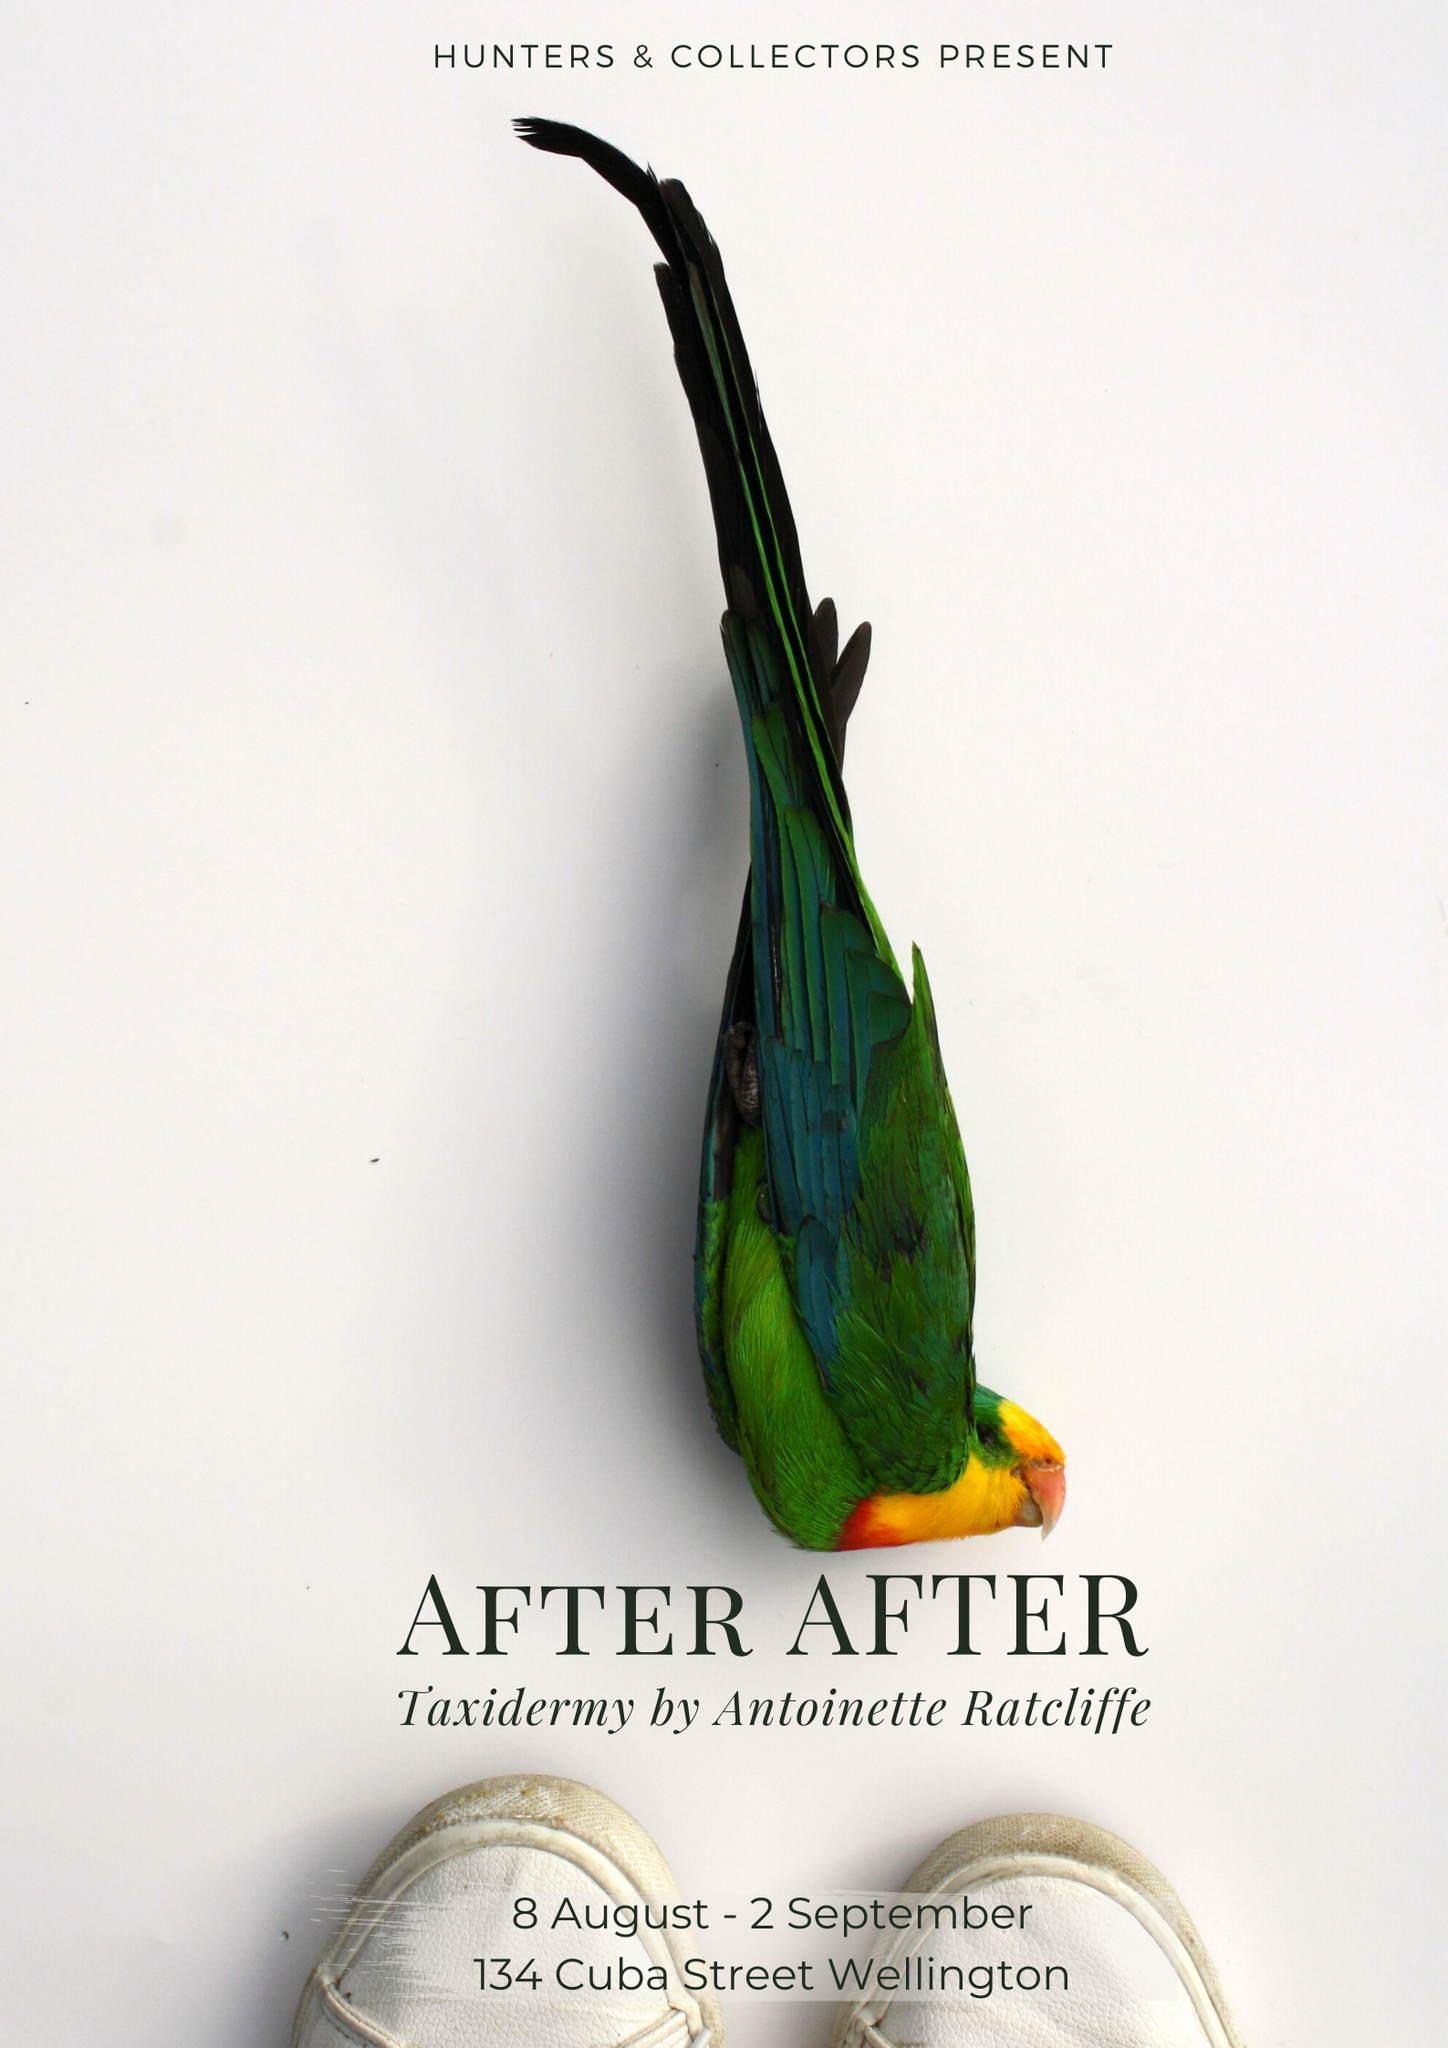 AFTER AFTER by Antoinette Ratcliffe